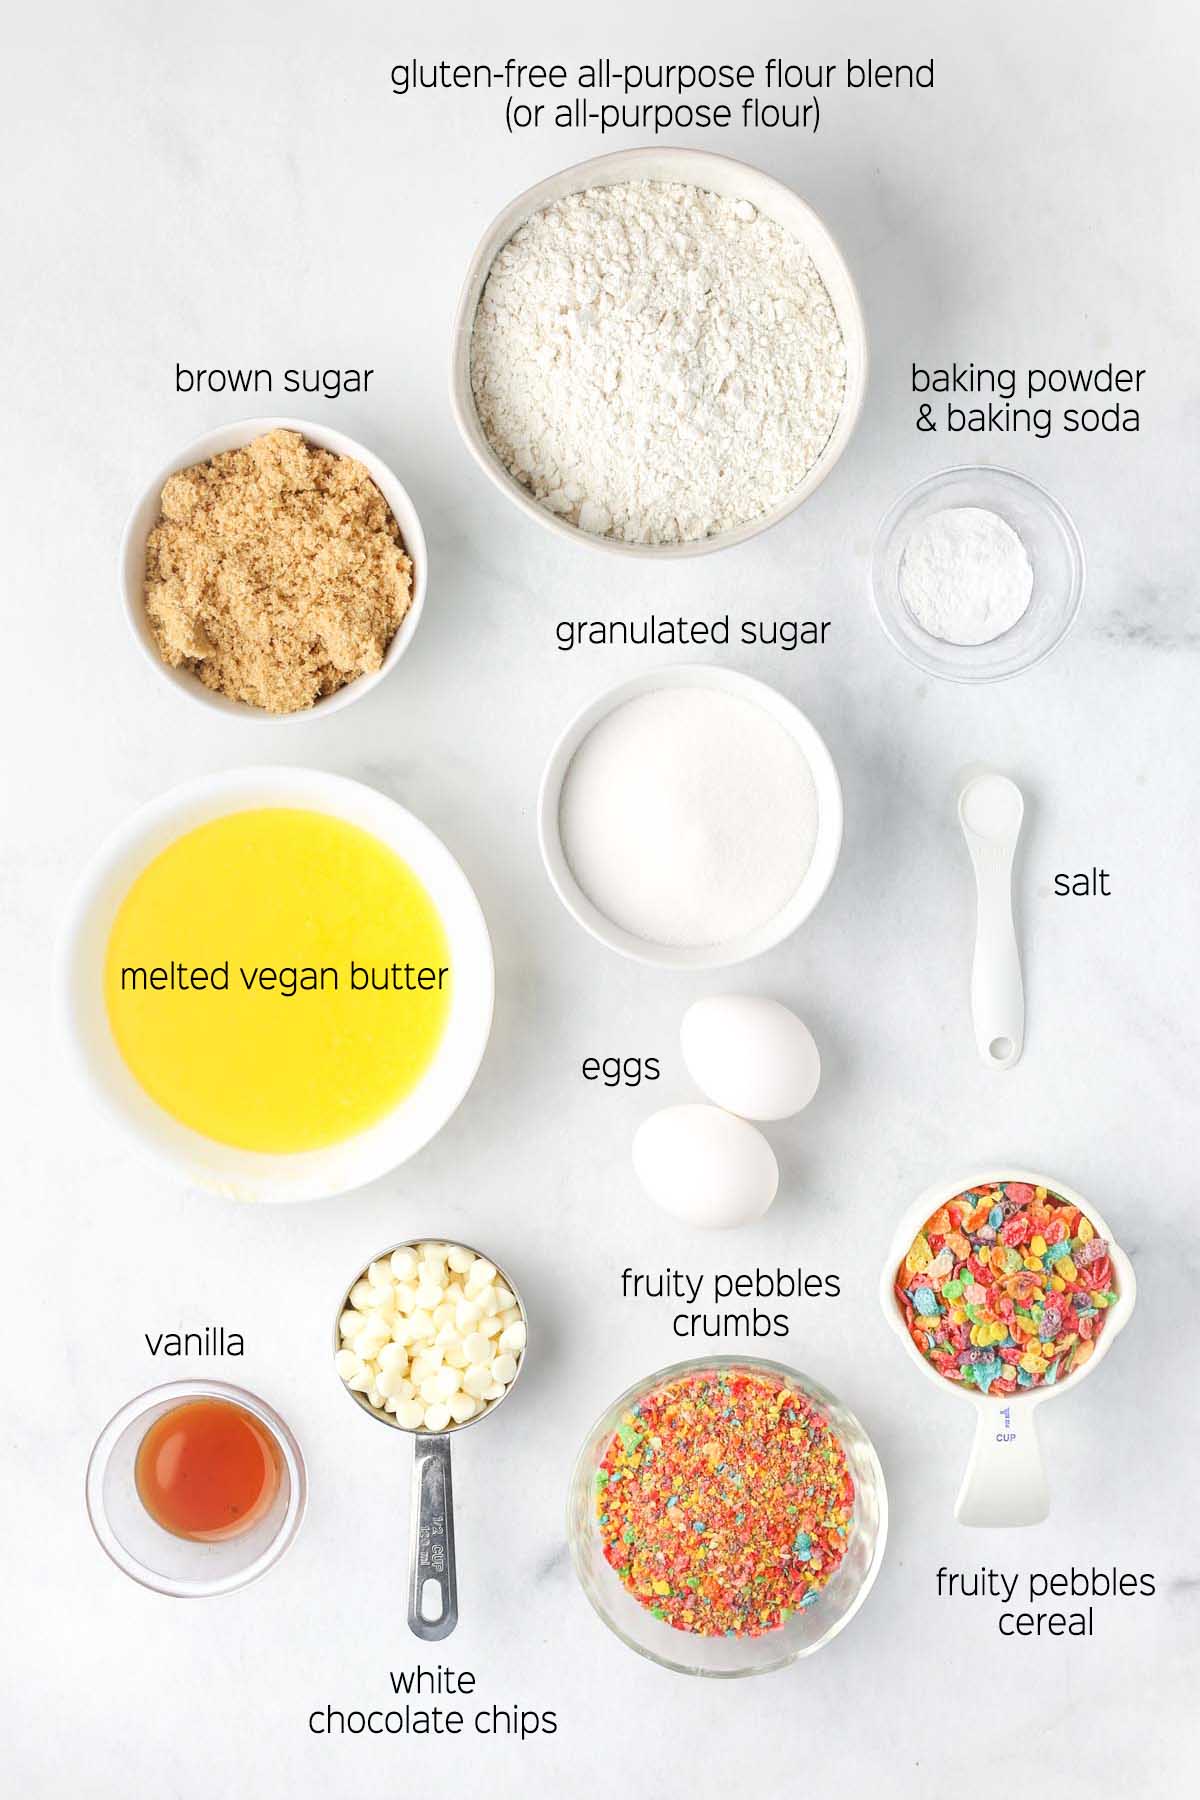 all ingredients to make the cookie recipe shown from above on a marble surface in white dishes.